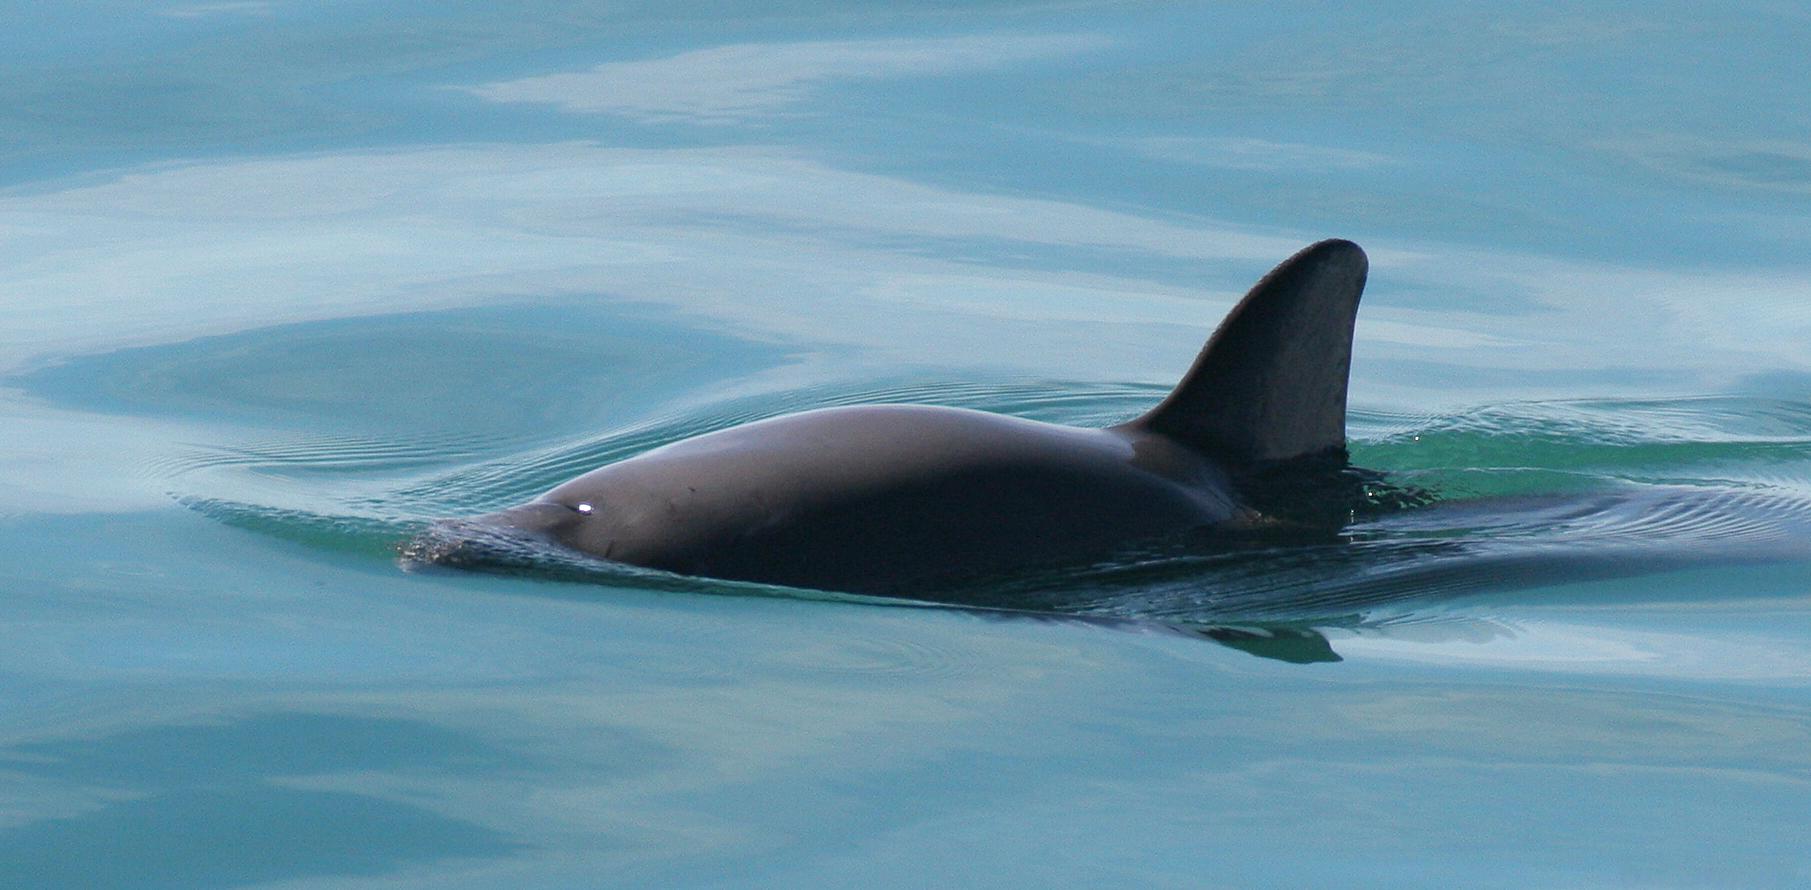 The vaquita marina is a critically endangered porpoise species that lives only in the northern part of the Gulf of California. Scientists believe the population may be down to just 30 animals.